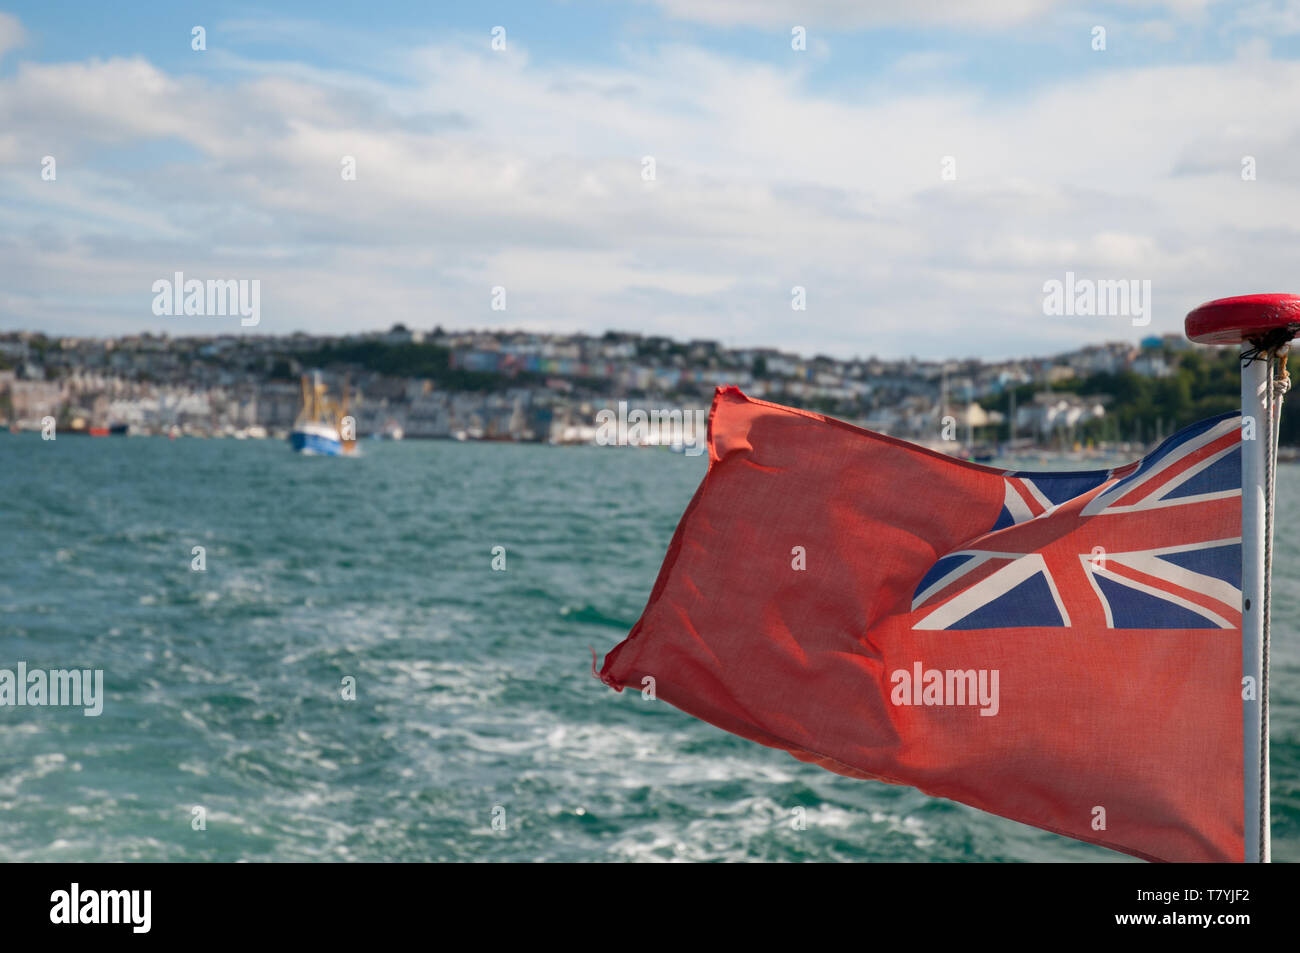 British maritime flag 'Red Ensign' or 'Red Duster' waving in the wind on the back of a motored boat. Stock Photo